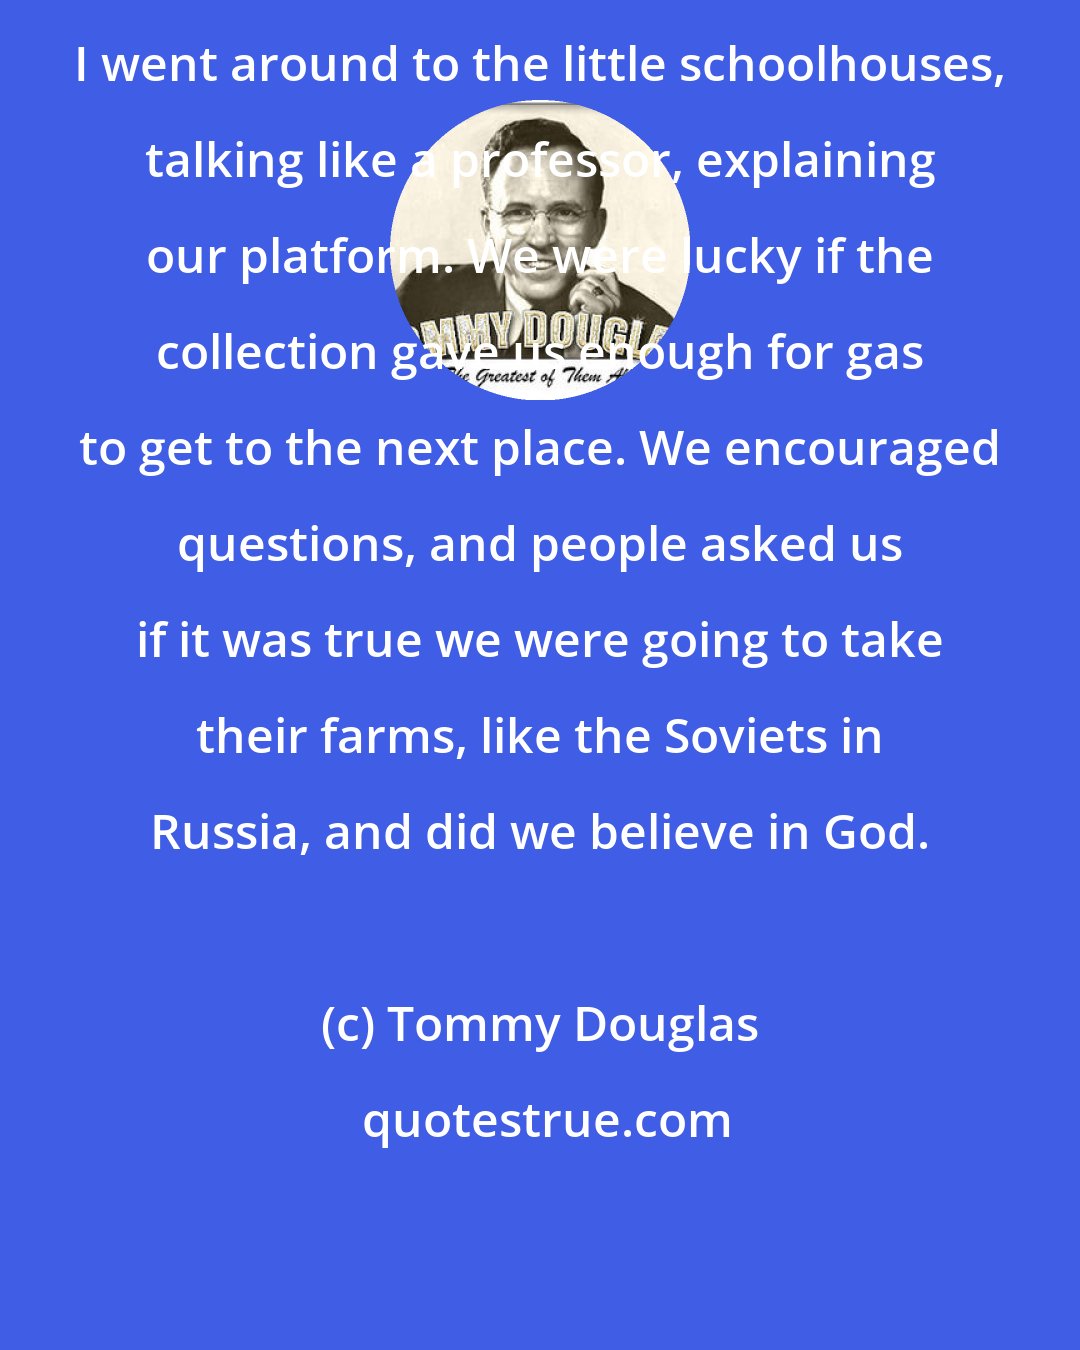 Tommy Douglas: I went around to the little schoolhouses, talking like a professor, explaining our platform. We were lucky if the collection gave us enough for gas to get to the next place. We encouraged questions, and people asked us if it was true we were going to take their farms, like the Soviets in Russia, and did we believe in God.